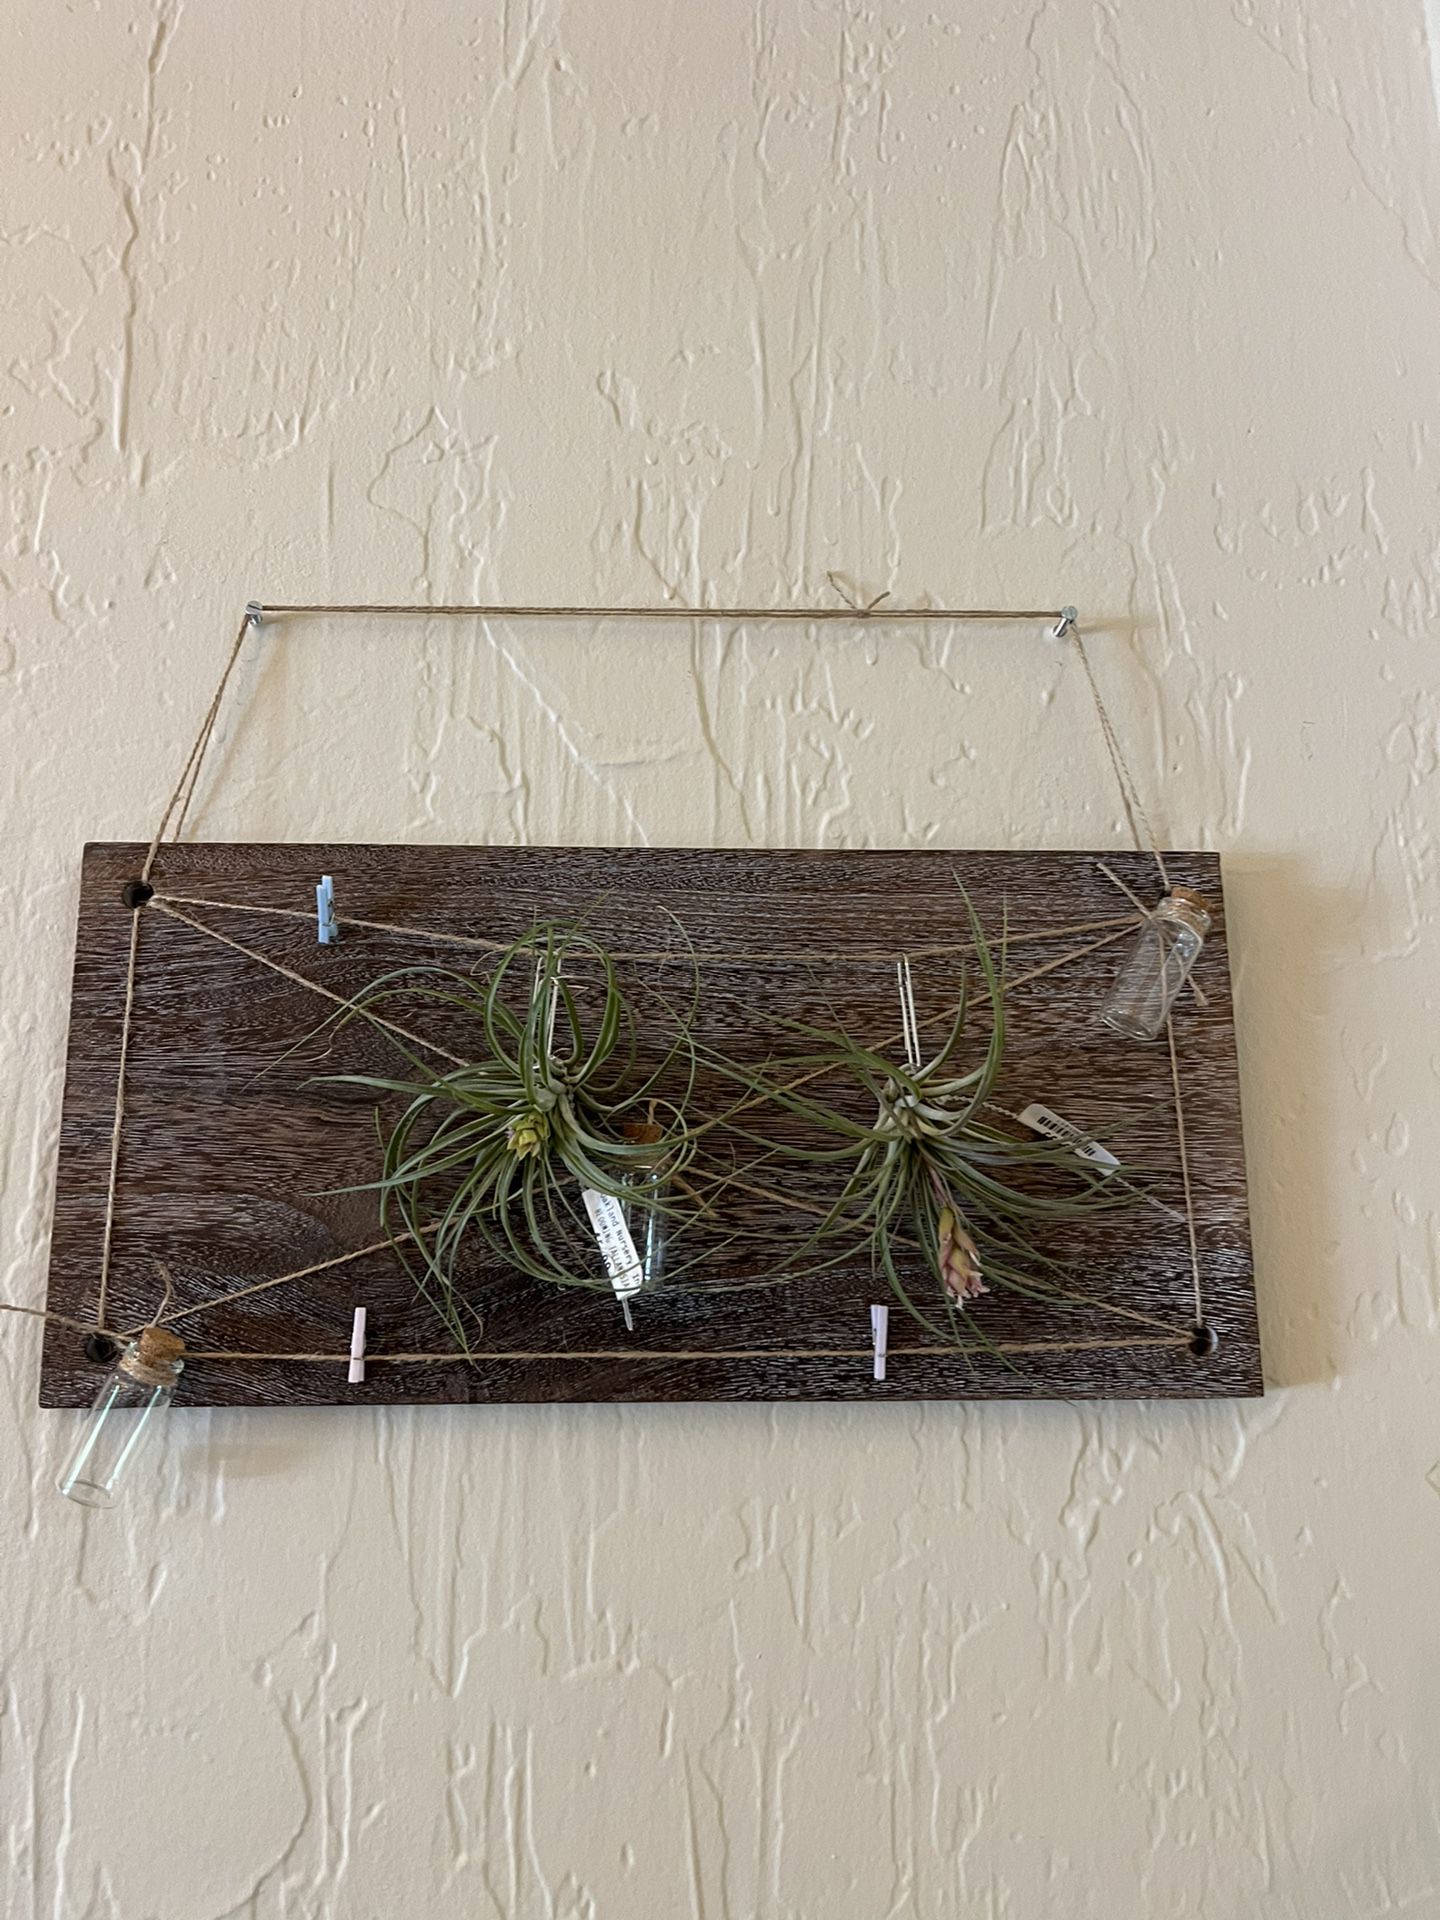 Rustic Floating Shelves Wall Mounted